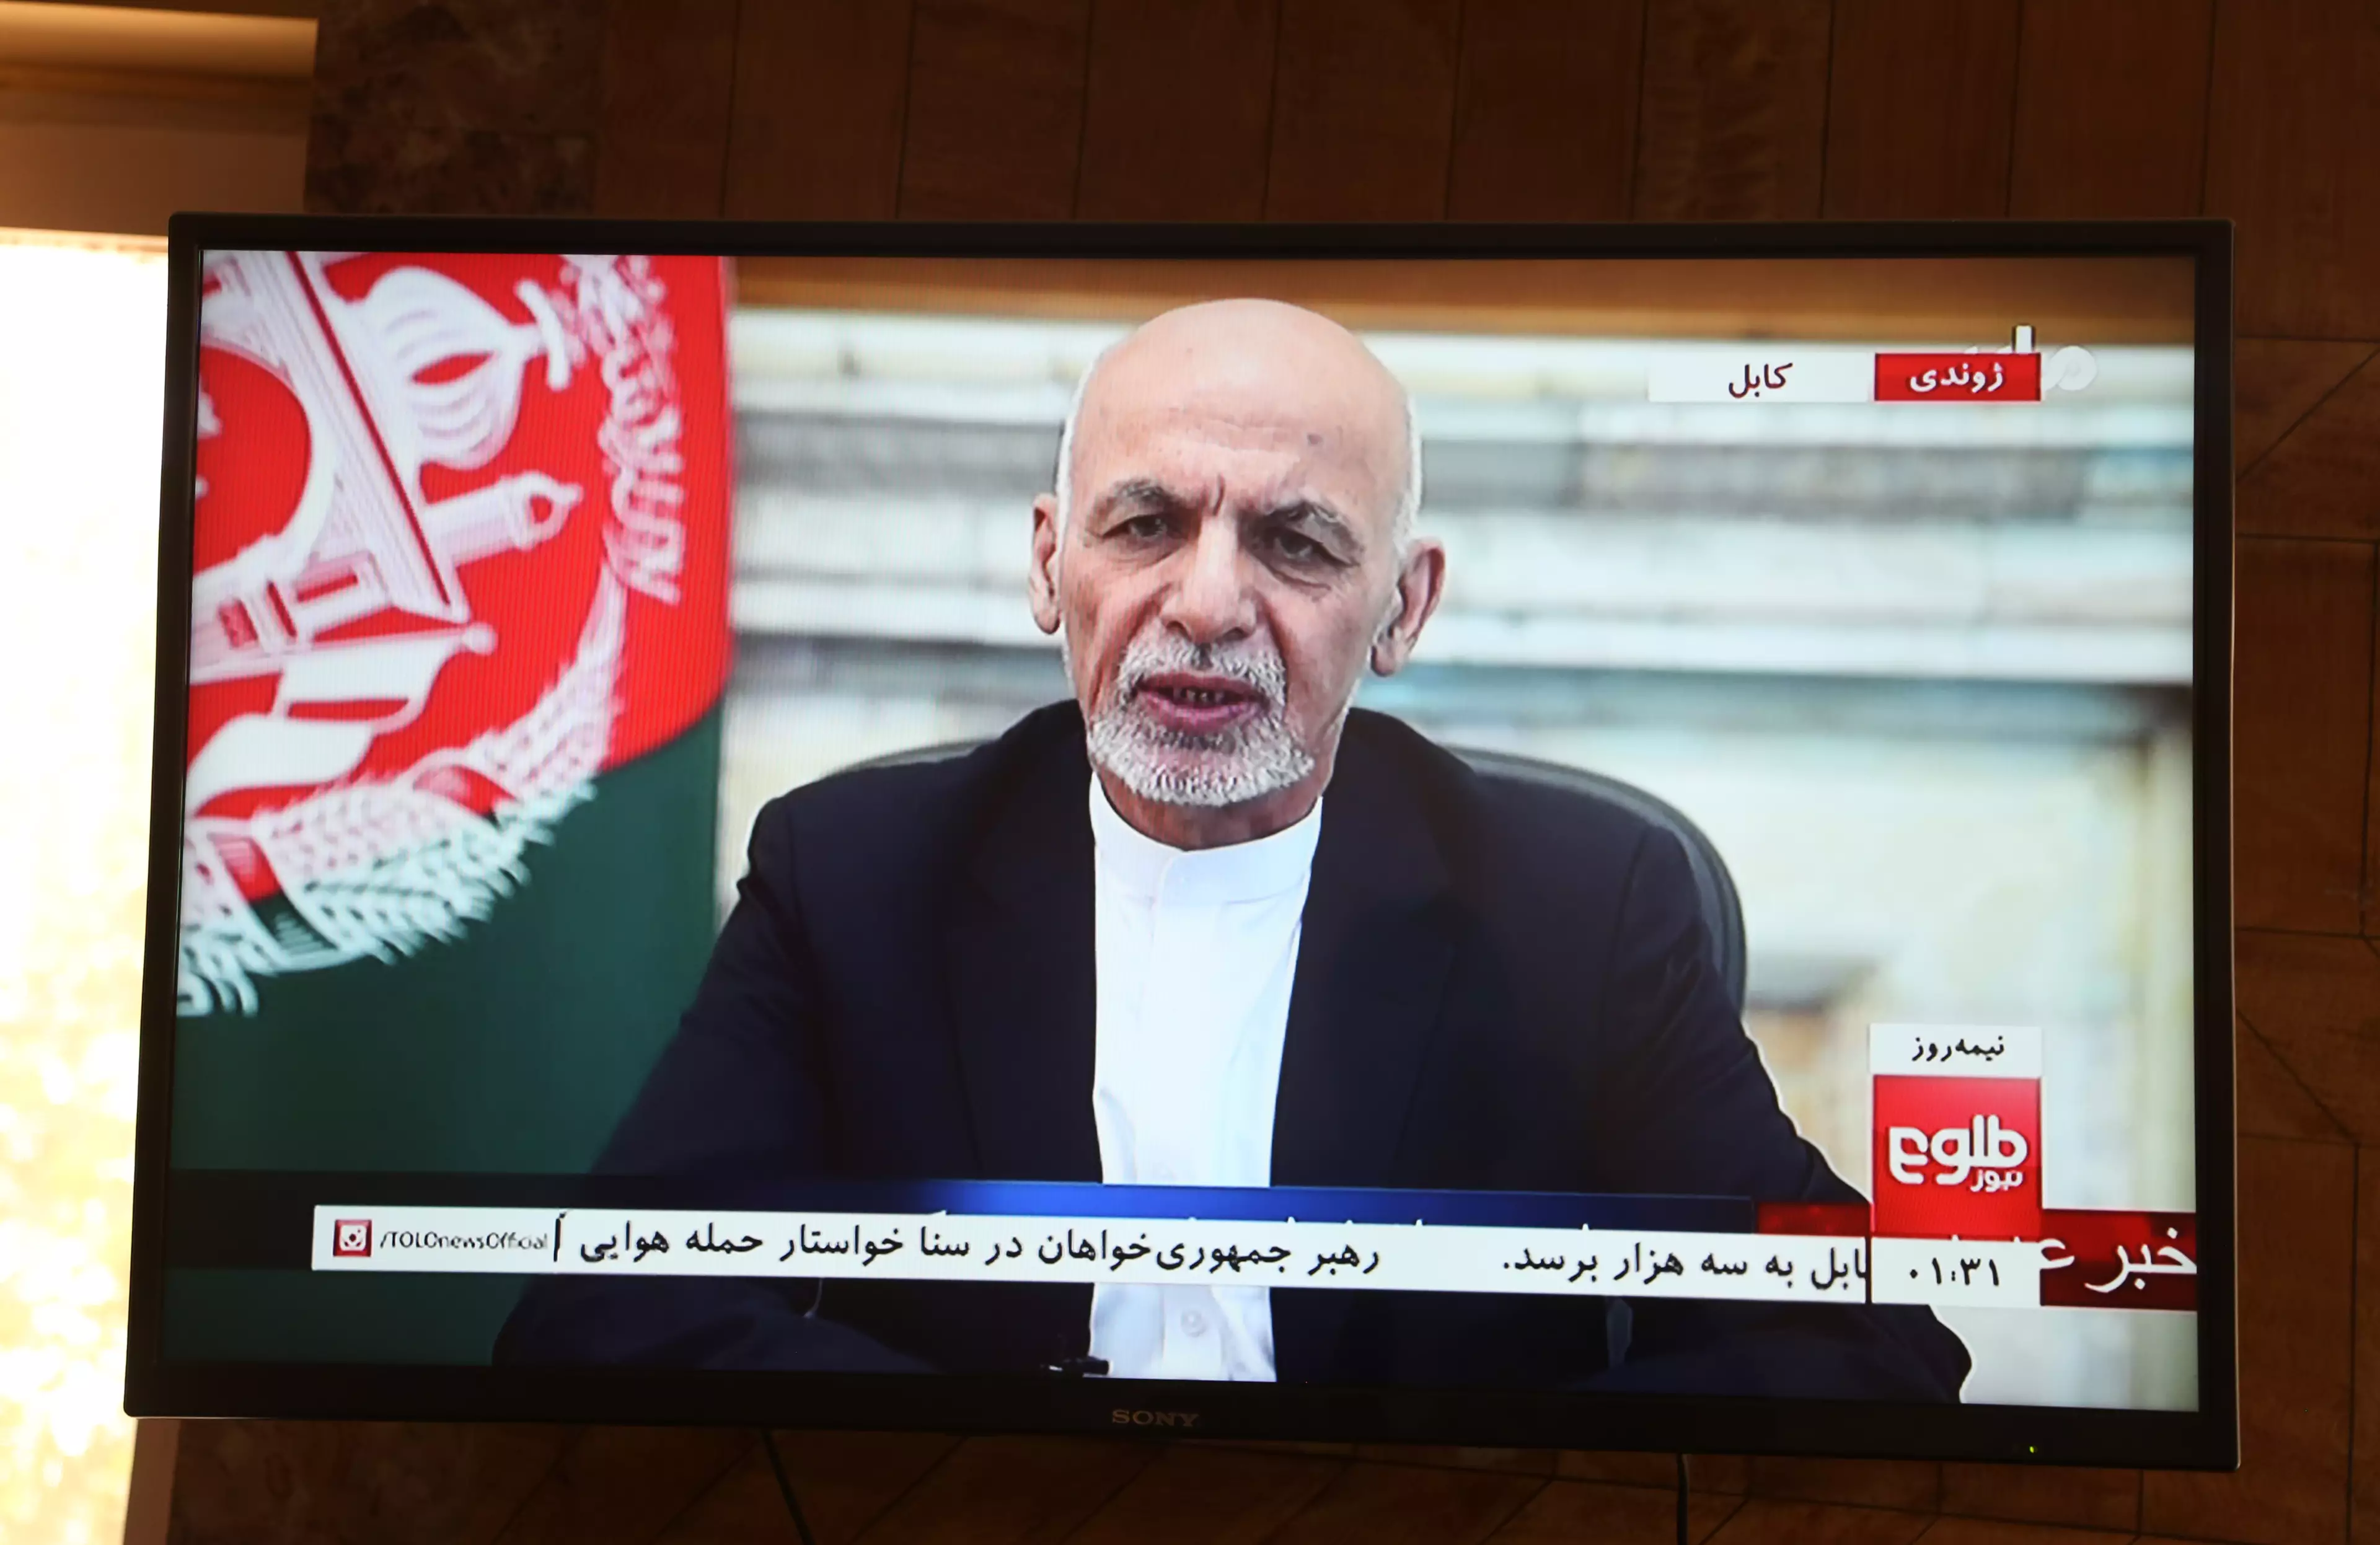 President Ghani delivers televised address to the nation.